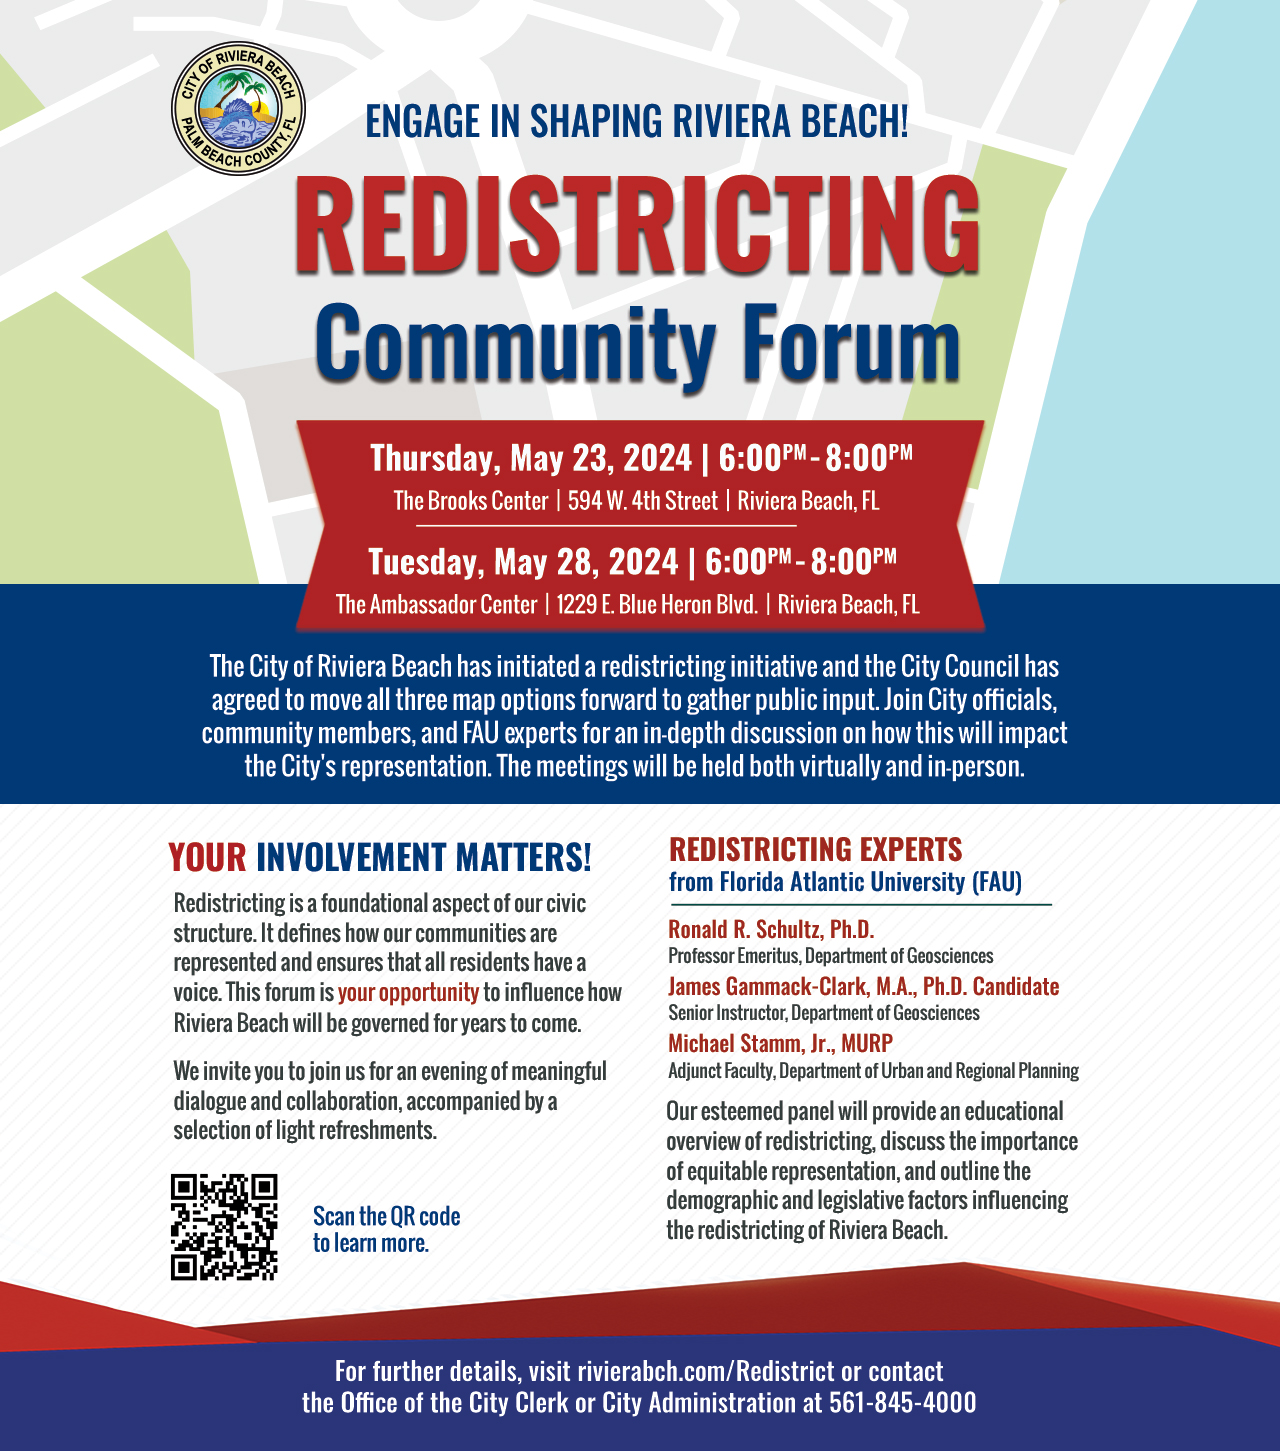 ENGAGE IN SHAPING RIVIERA BEACH! REDISTRICTING Community Forum Thursday, May 23, 2024 | 6:00PM - 8:00PM The Brooks Center | 594 W. 4th Street | Riviera Beach, FL Tuesday, May 28, 2024 | 6:00PM - 8:00PM The Ambassador Center | 1229 E. Blue Heron Biva. | Riviera Beach, FL The City of Riviera Beach has initiated a redistricting initiative and the City Council has agreed to move all three map options forward to gather public input. Join City officials, community members, and FAU experts for an in-depth discussion on how this will impact the City's representation. The meetings will be held both virtually and in-person. YOUR INVOLVEMENT MATTERS! Redistricting is a foundational aspect of our civic structure. It defines how our communities are represented and ensures that all residents have a voice. This forum is your opportunity to influence how Riviera Beach will be governed for years to come. We invite you to join us for an evening of meaningful dialogue and collaboration, accompanied by a selection of light refreshments. Scan the QR code to learn more. REDISTRICTING EXPERTS from Florida Atlantic University (FAU) Ronald R. Schultz, Ph.D. Professor Emeritus, Department of Geosciences James Gammack-Clark, M.A., Ph.D. Candidate Senior Instructor, Department of Geosciences Michael Stamm, Jr., MURP Adjunct Faculty, Department of Urban and Regional Planning Our esteemed panel will provide an educational overview of redistricting, discuss the importance of equitable representation, and outline the demographic and legislative factors influencing the redistricting of Riviera Beach.